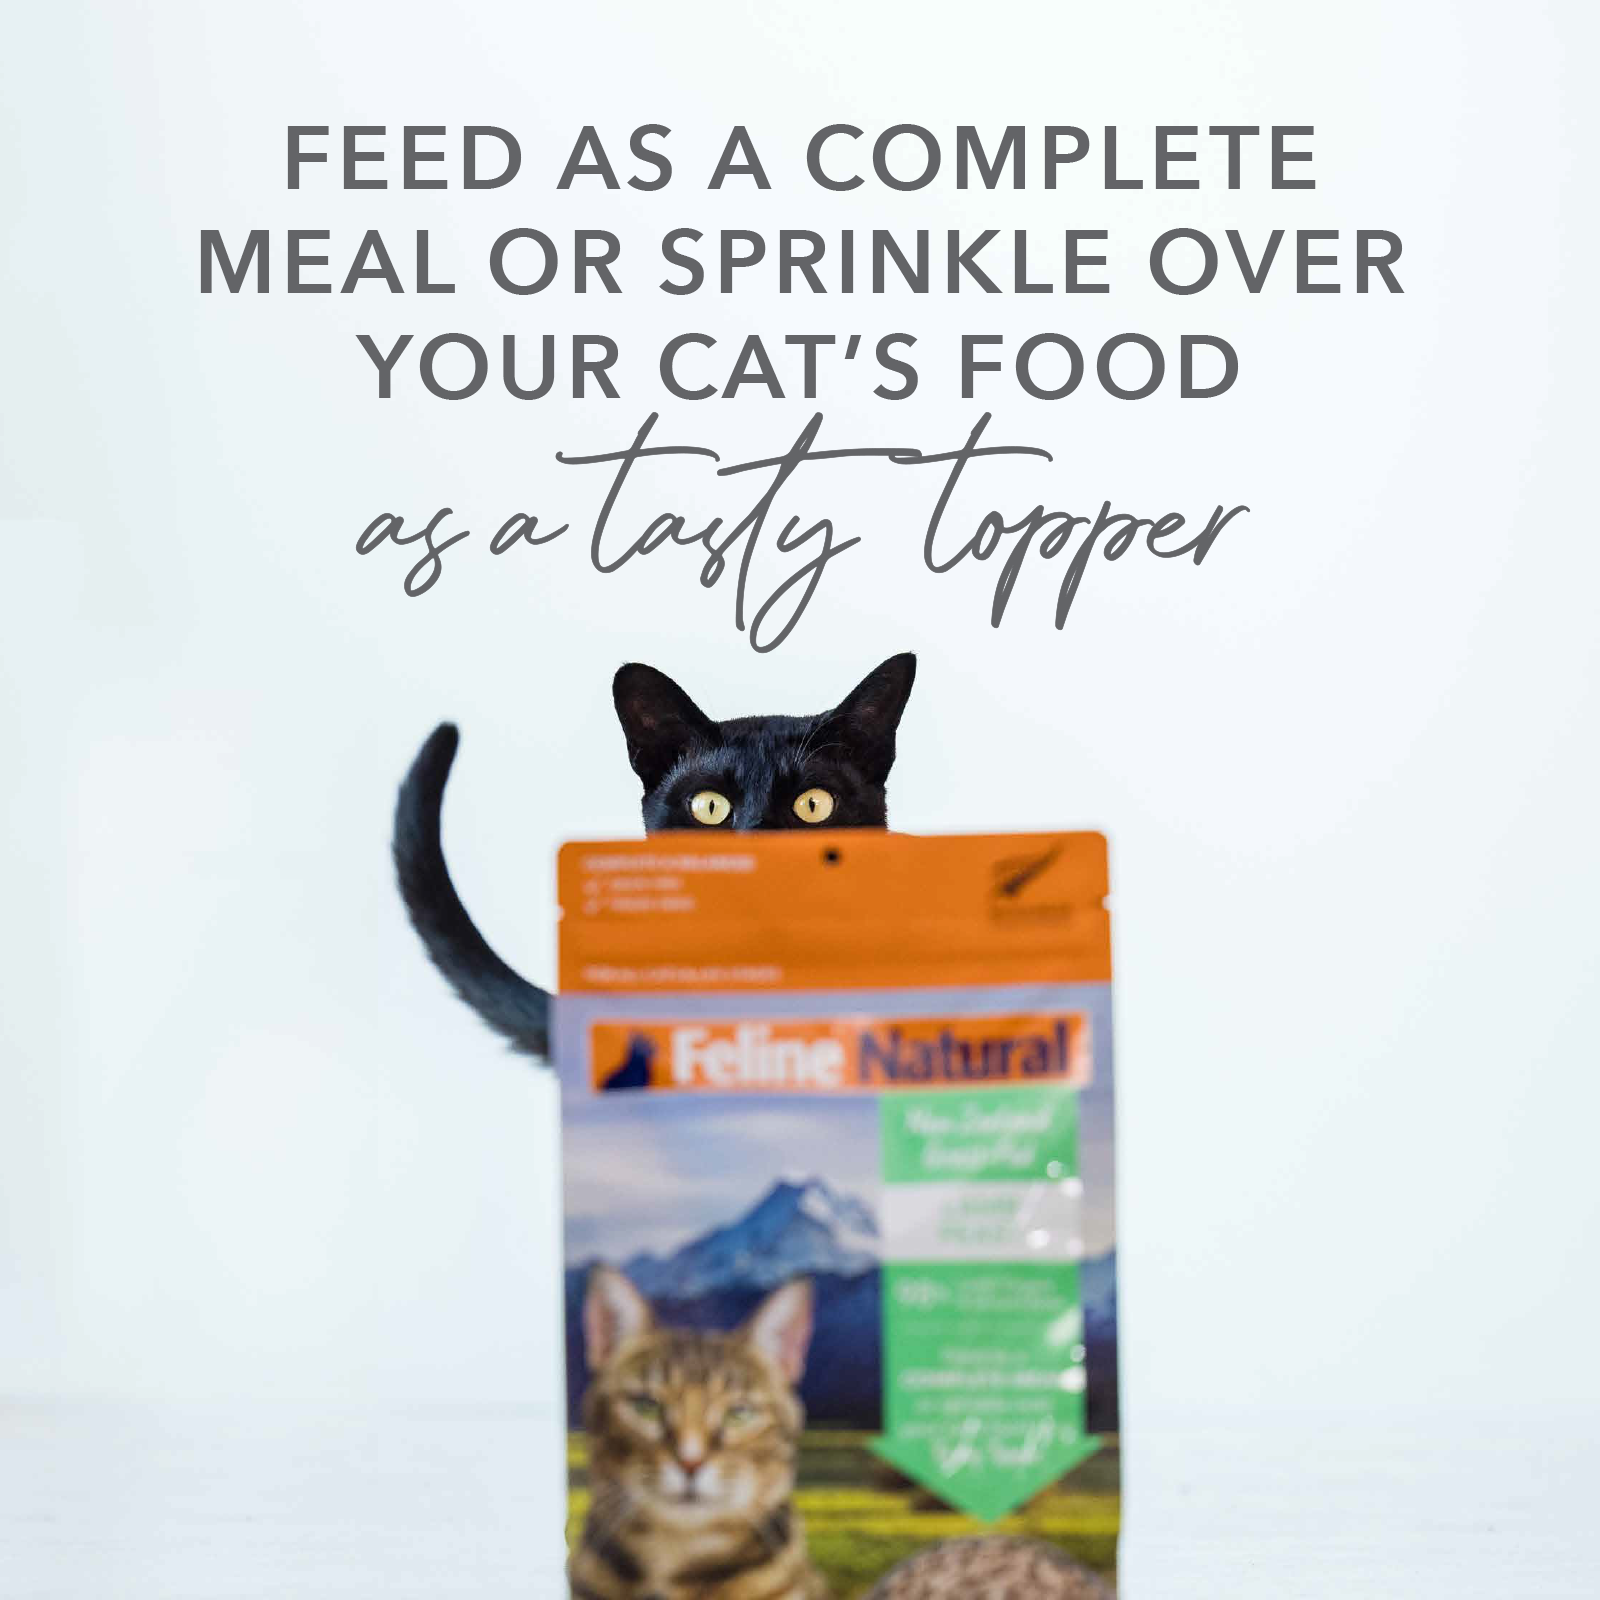 Feline Natural Lamb and Salmon Feast Freeze Dried